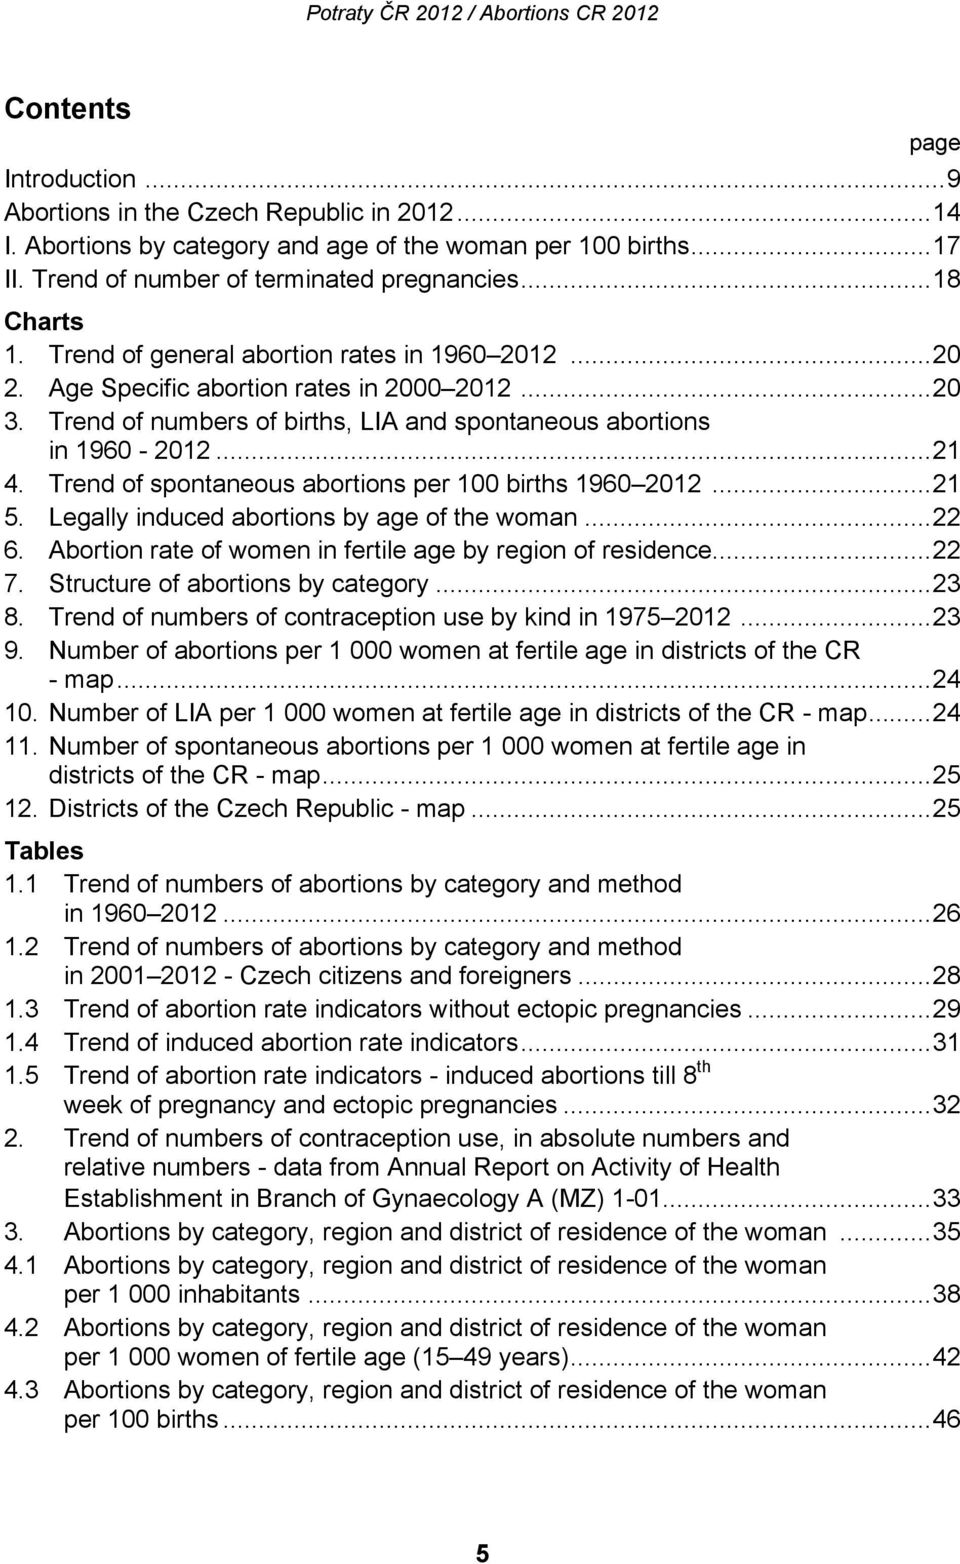 Trend of spontaneous per 100 births 1960 2012...21 5. Legally induced by age of the woman...22 6. Abortion rate of women in fertile age by region of residence...22 7. Structure of by category...23 8.